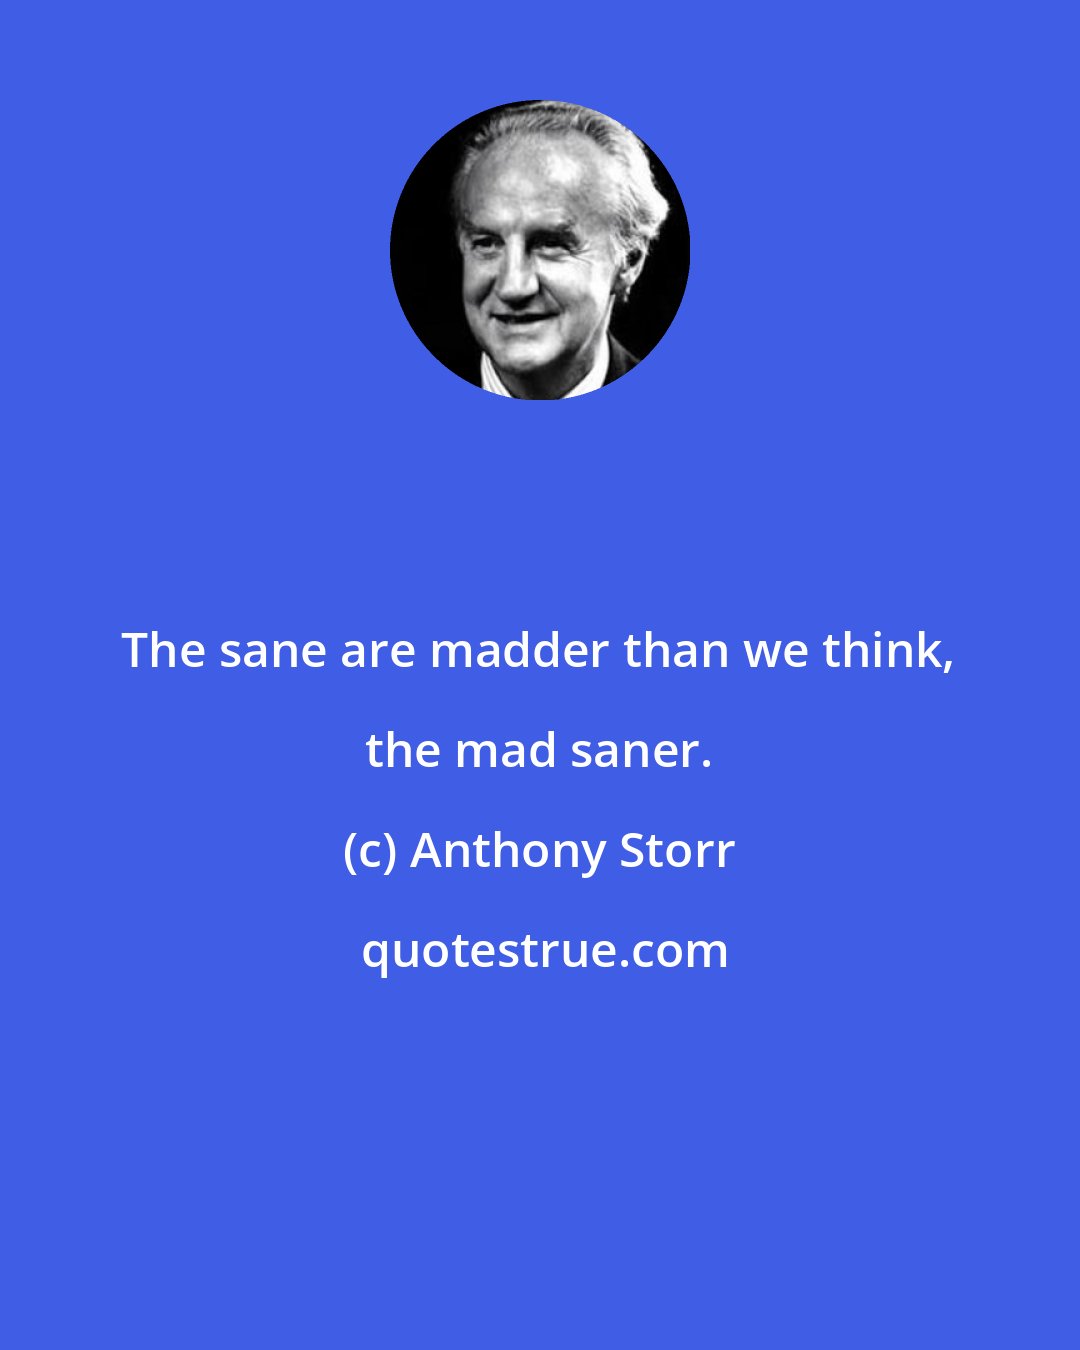 Anthony Storr: The sane are madder than we think, the mad saner.